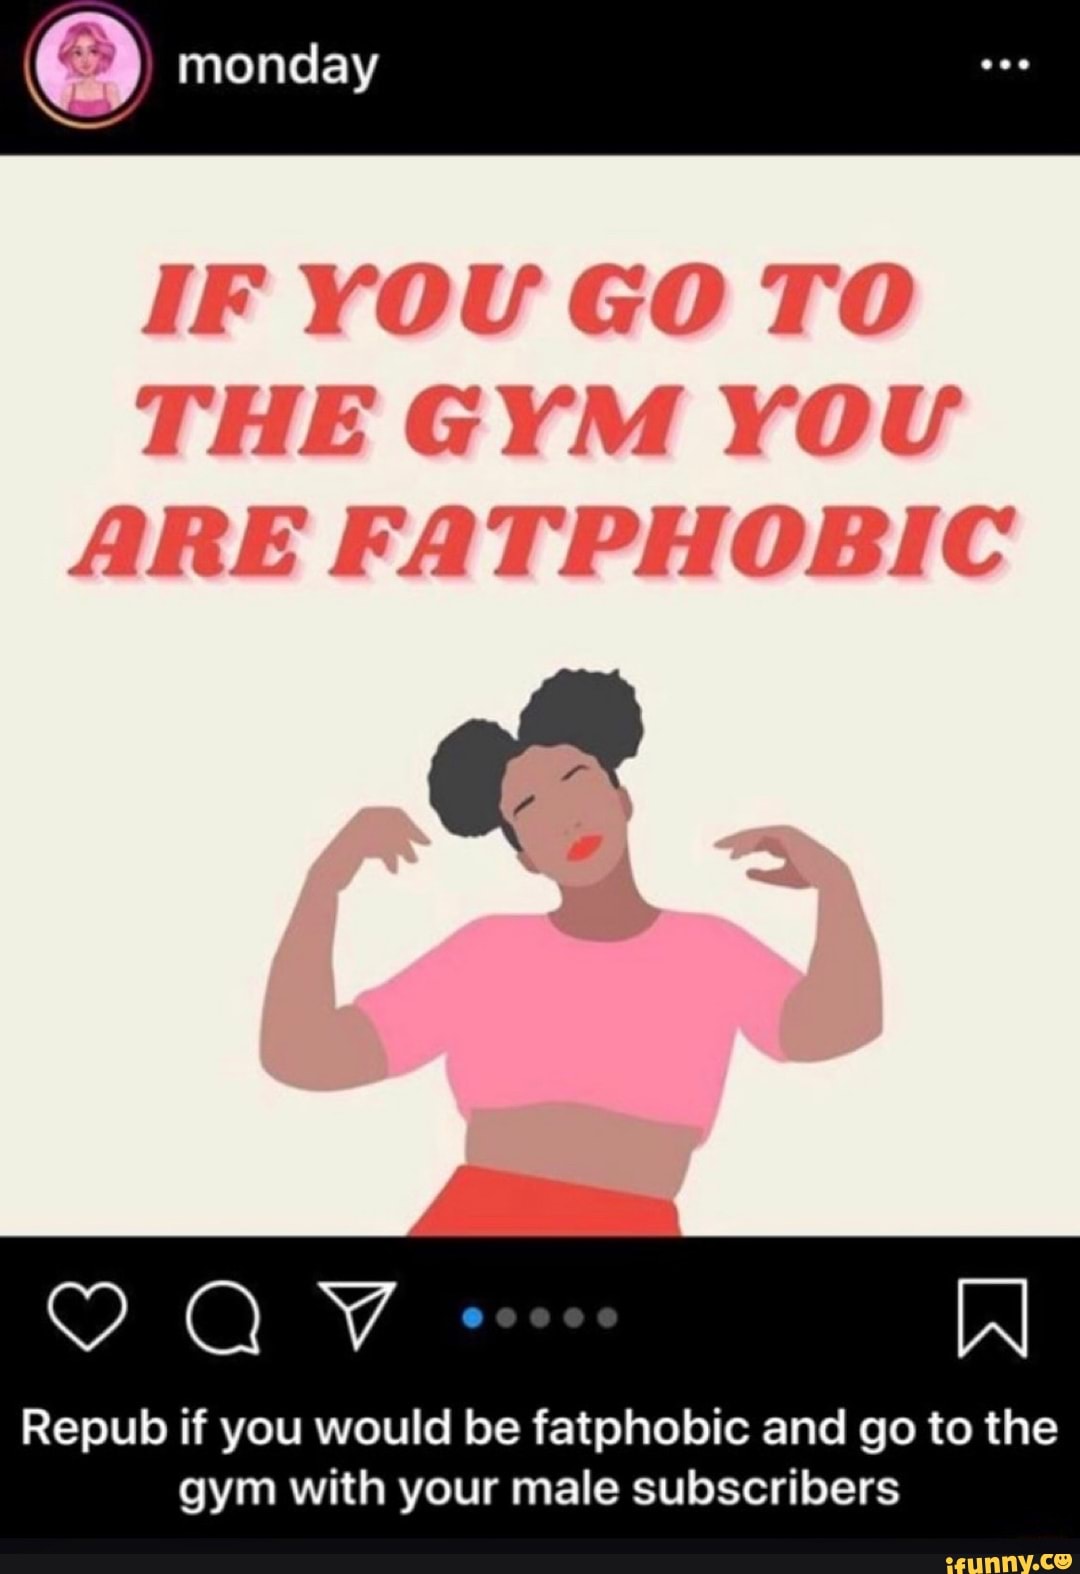 I like going to the gym. If you go to the Gym you are fatphobic. If you go to the Gym you are fatphobic meme. If you go to the Gym you support fat shaming. Fatphobic.